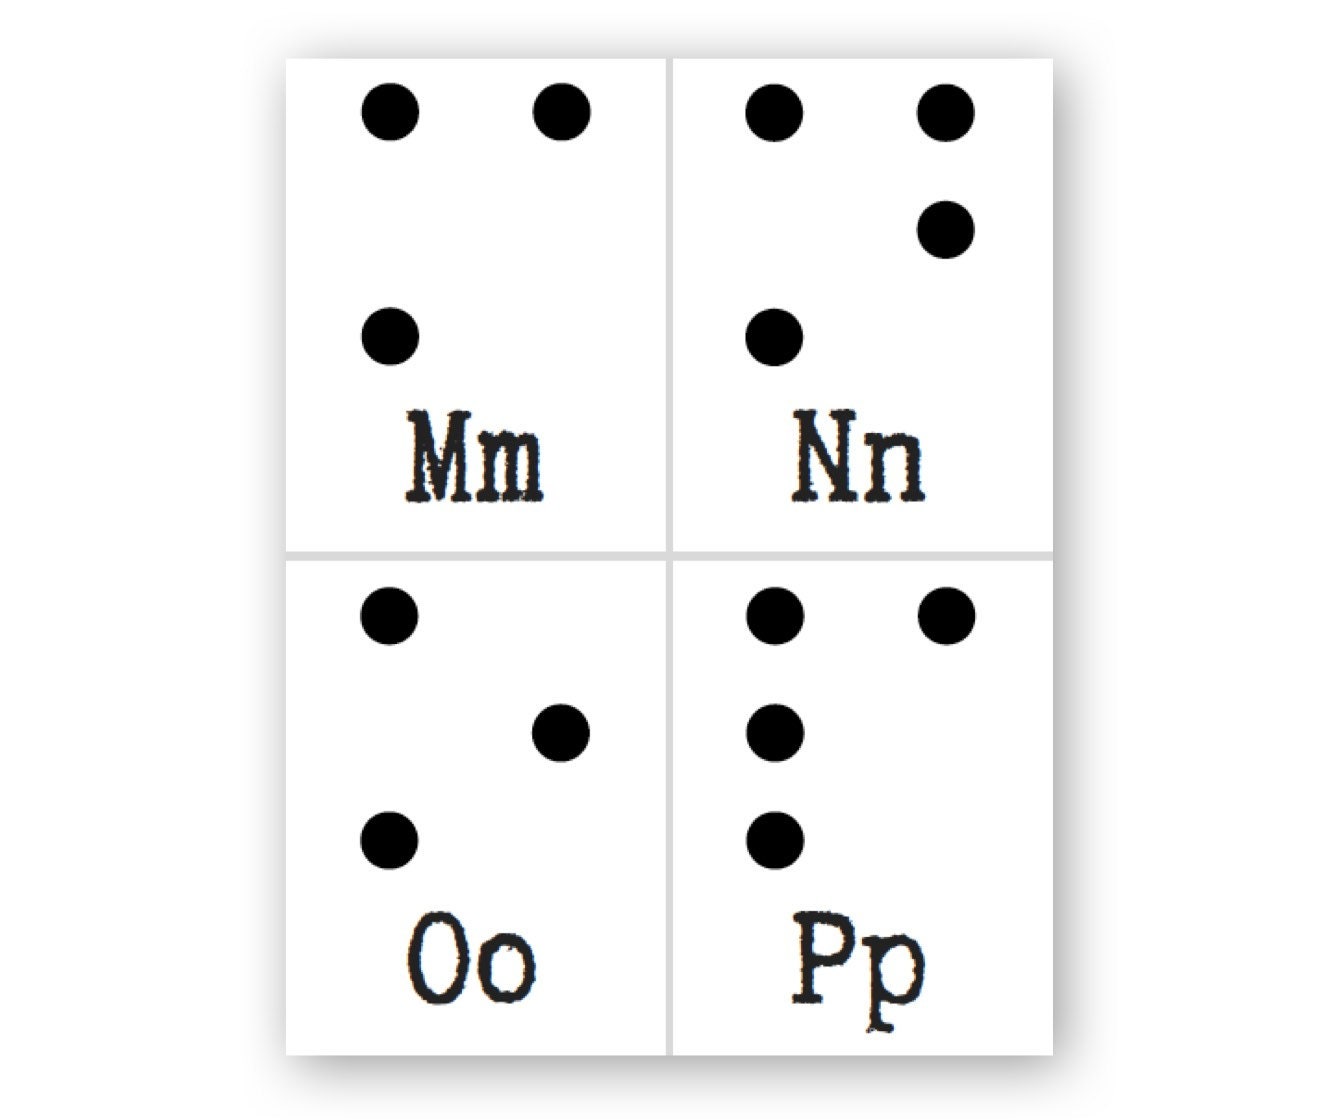 Music Braille Flash Cards